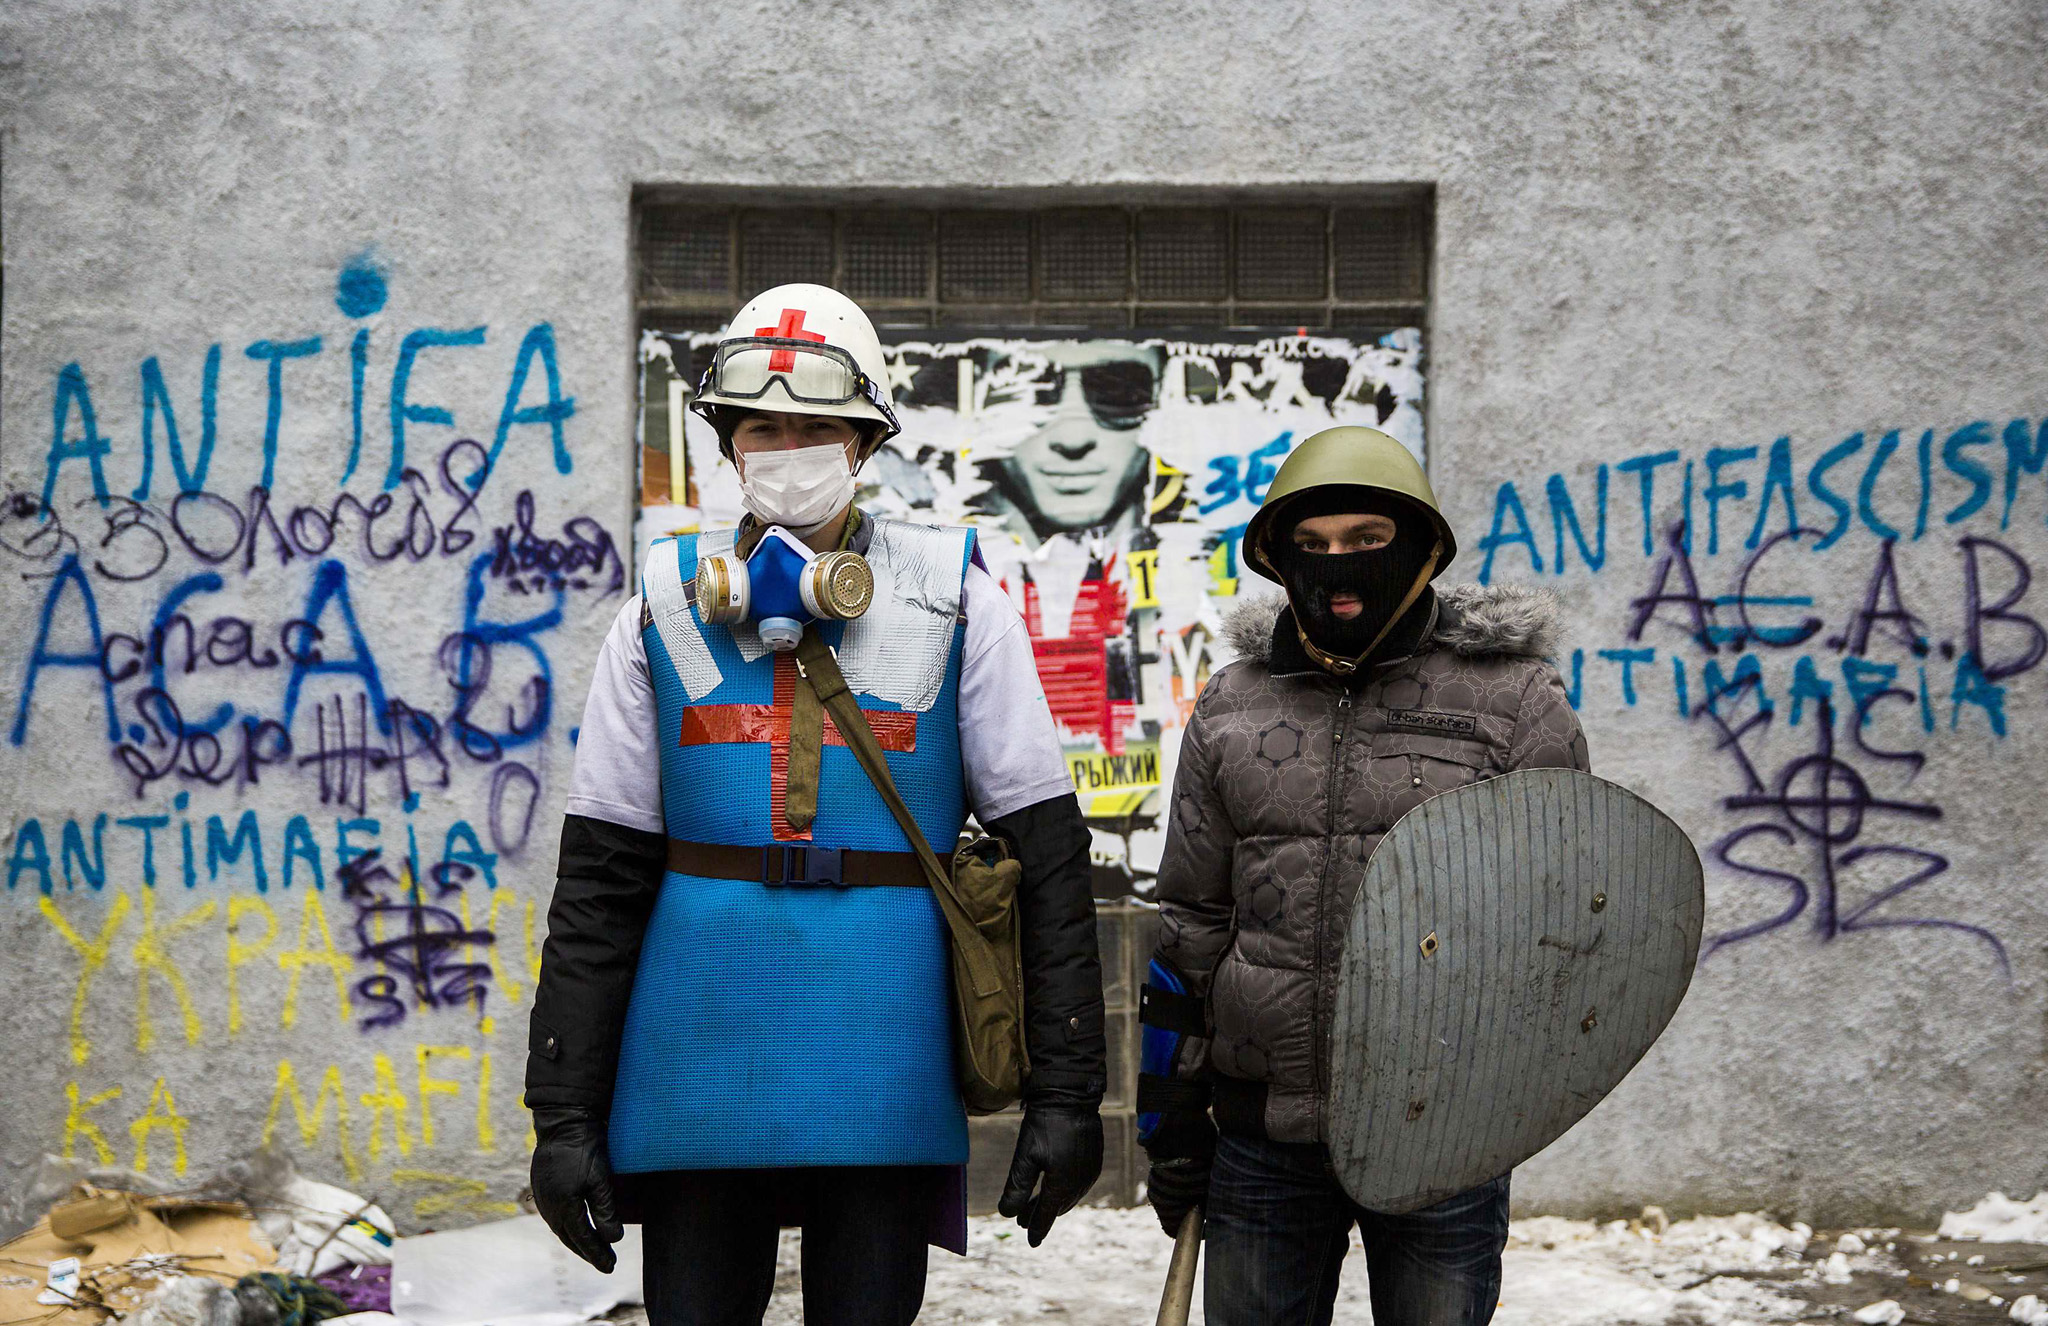 Ukraine looks more and more like a post-apocalyptic video game. Medical worker and his body guard